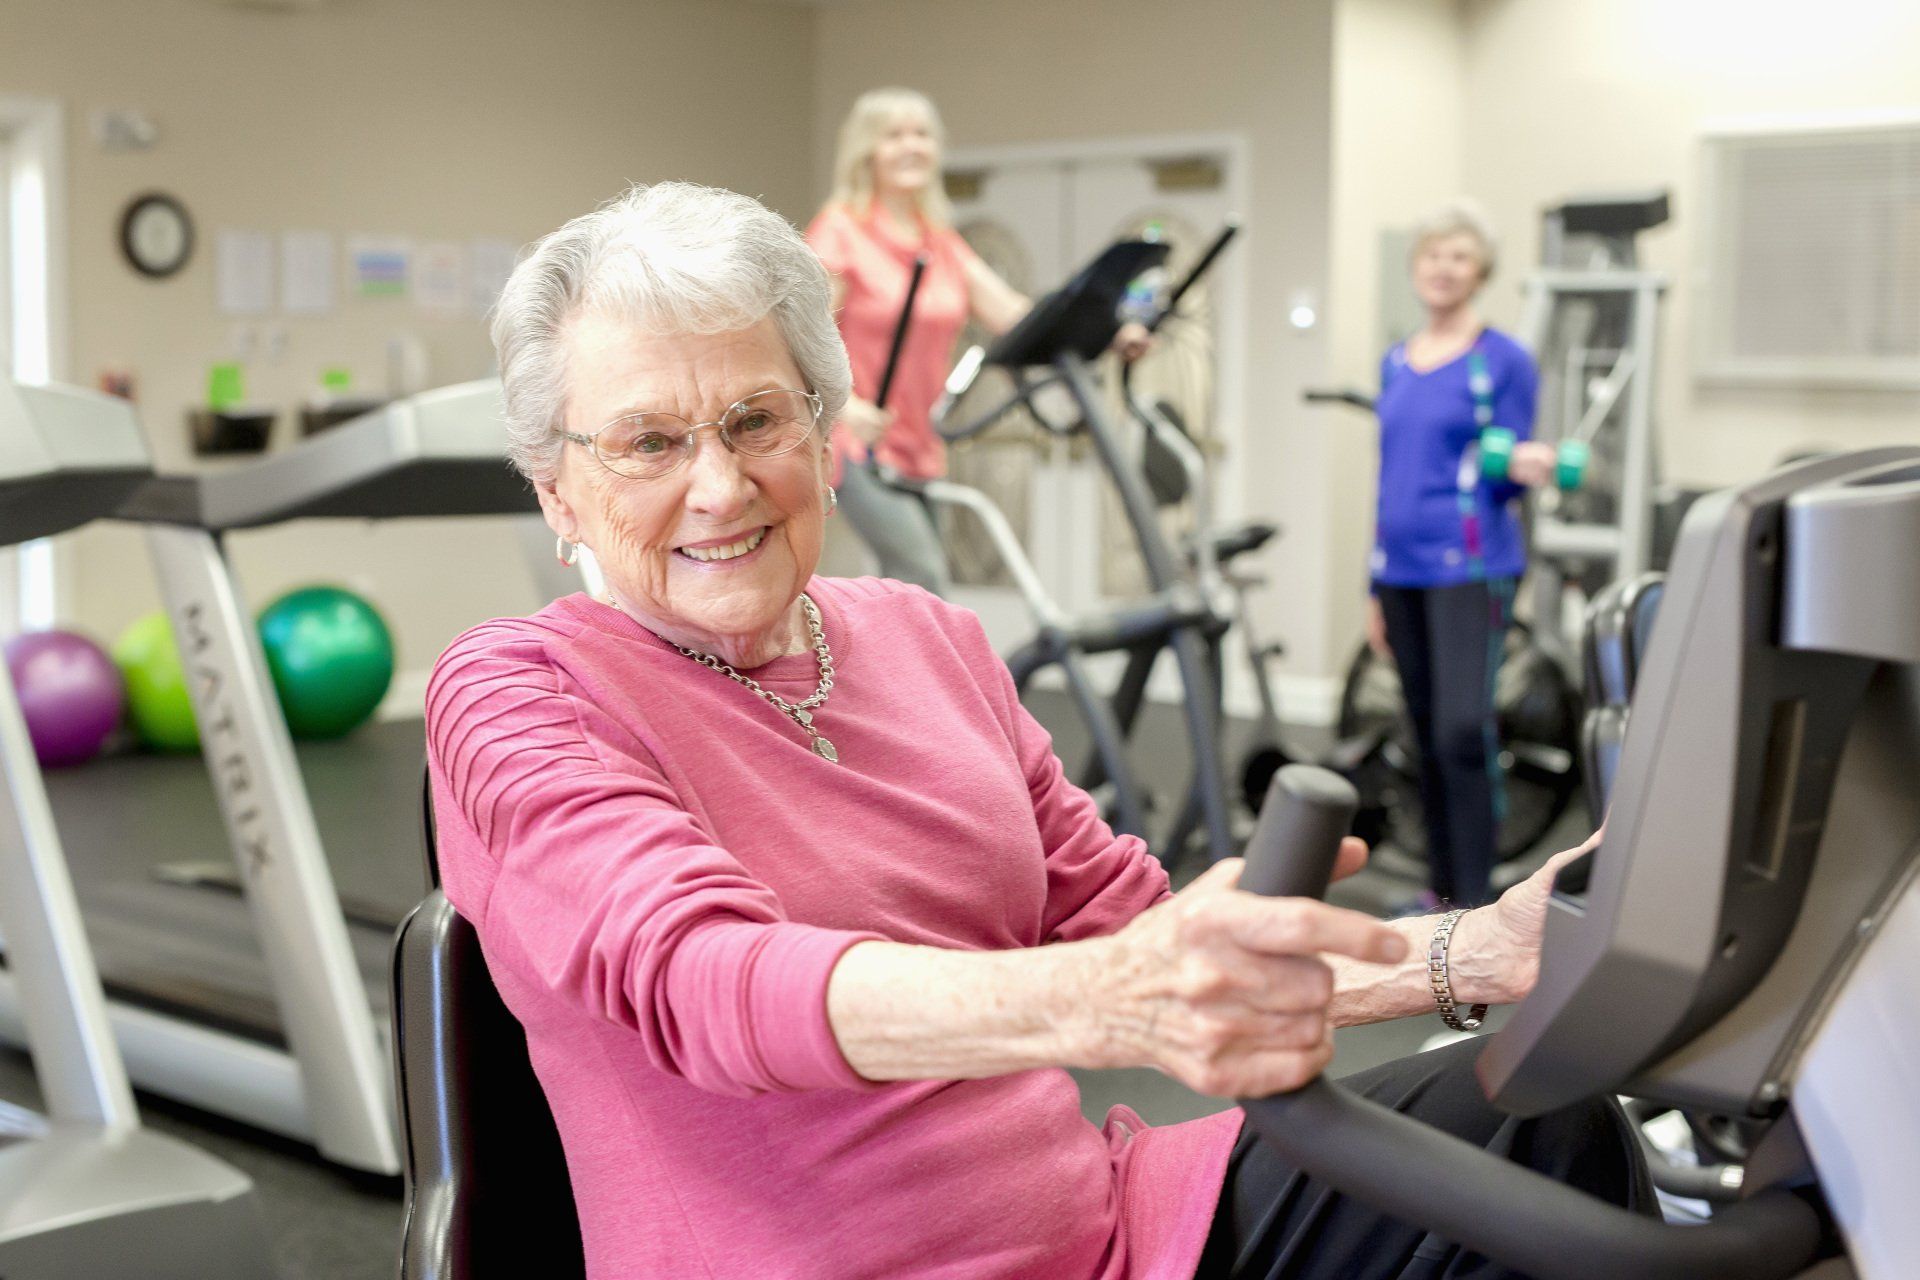 Retired lady exercising on a seated bike in the fitness center